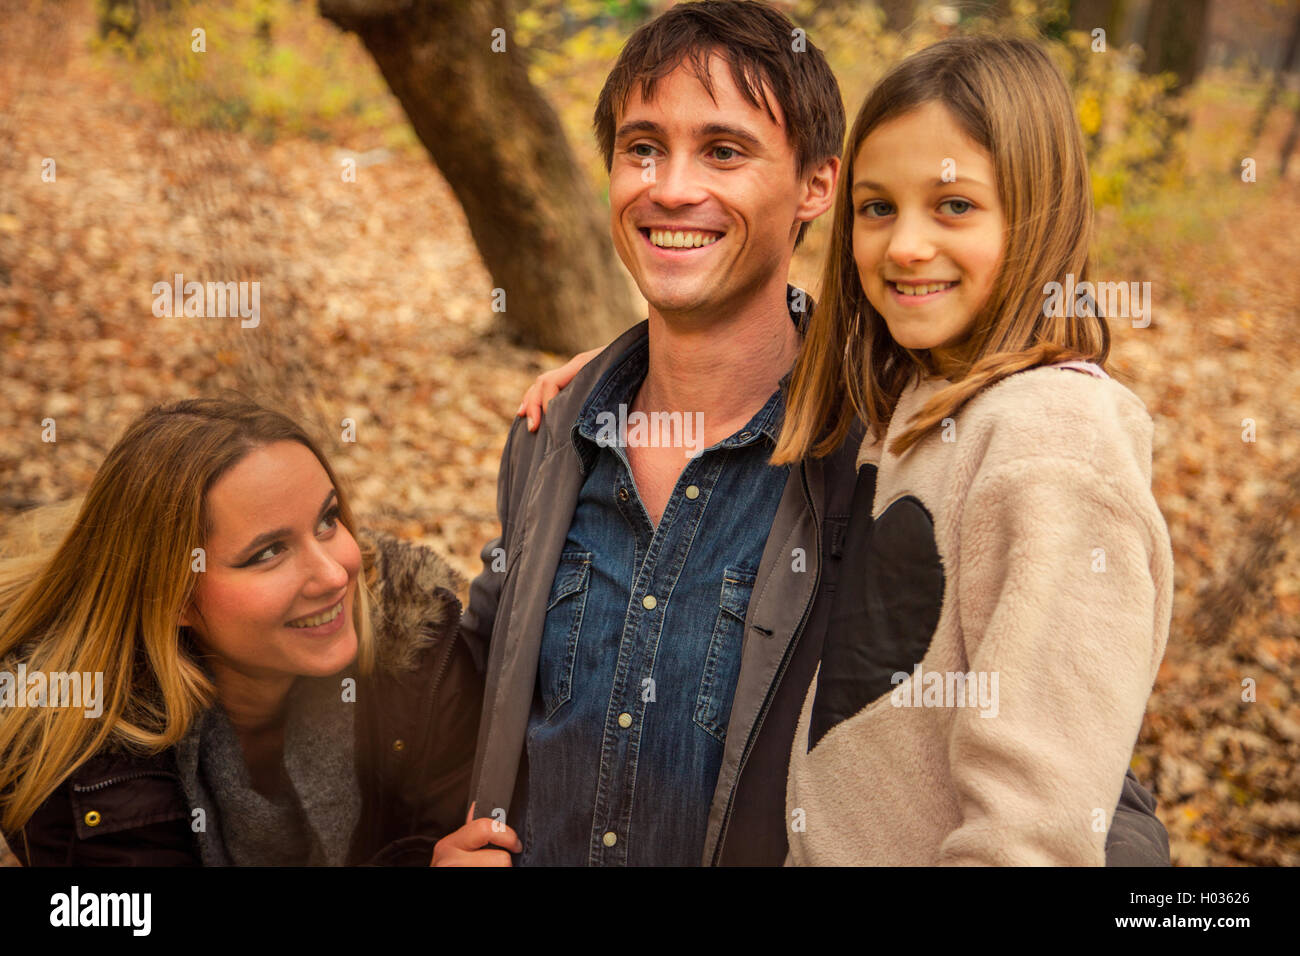 ZAGREB, CROATIA - 15 NOVEMBER 2015: Family of three stand next to each other in park. Stock Photo